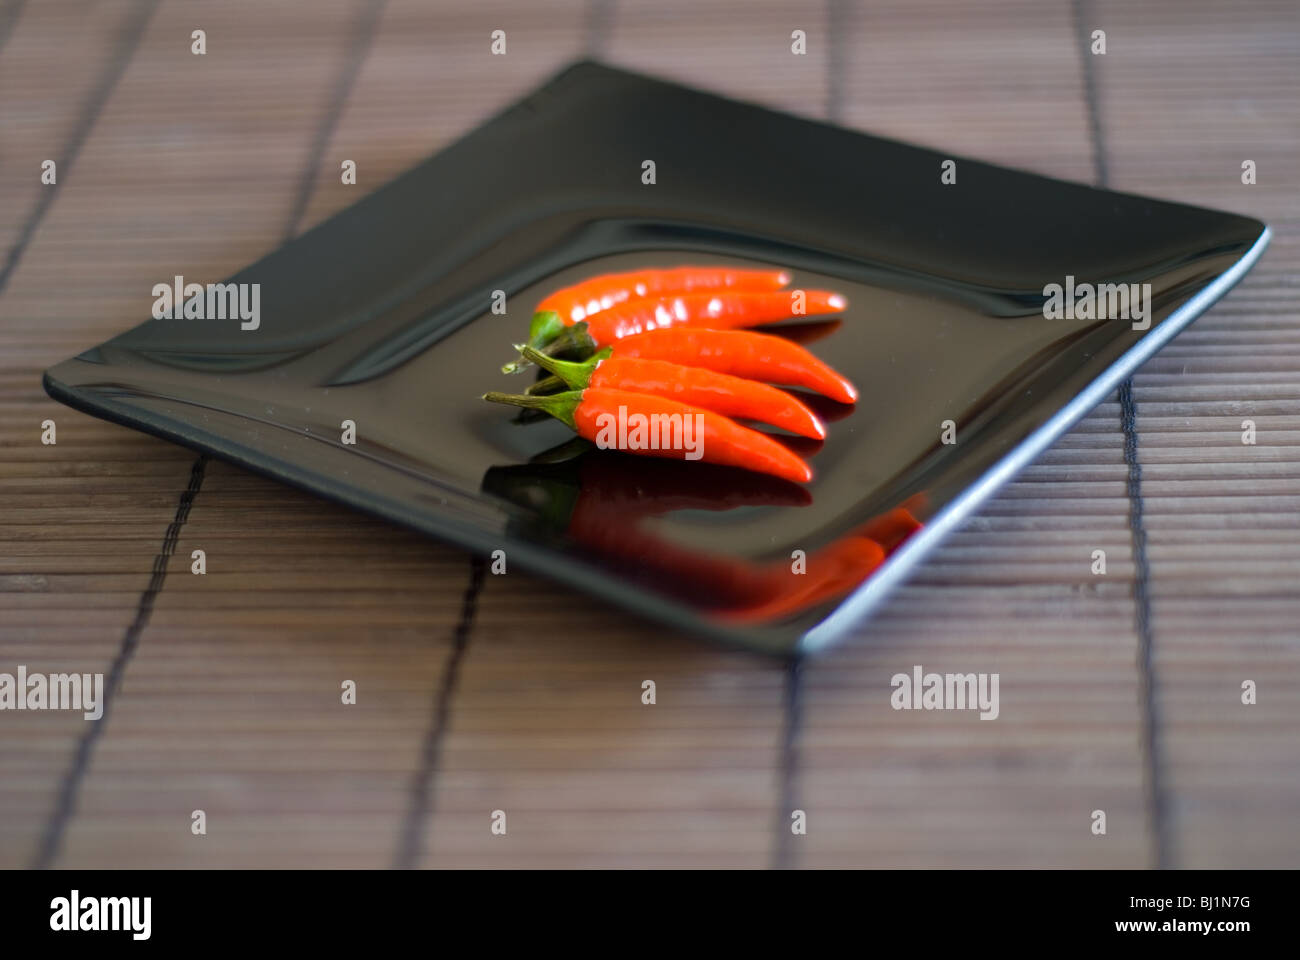 An Asian Style Square Black Plate with Four Red Chillis on a bamboo surface Stock Photo